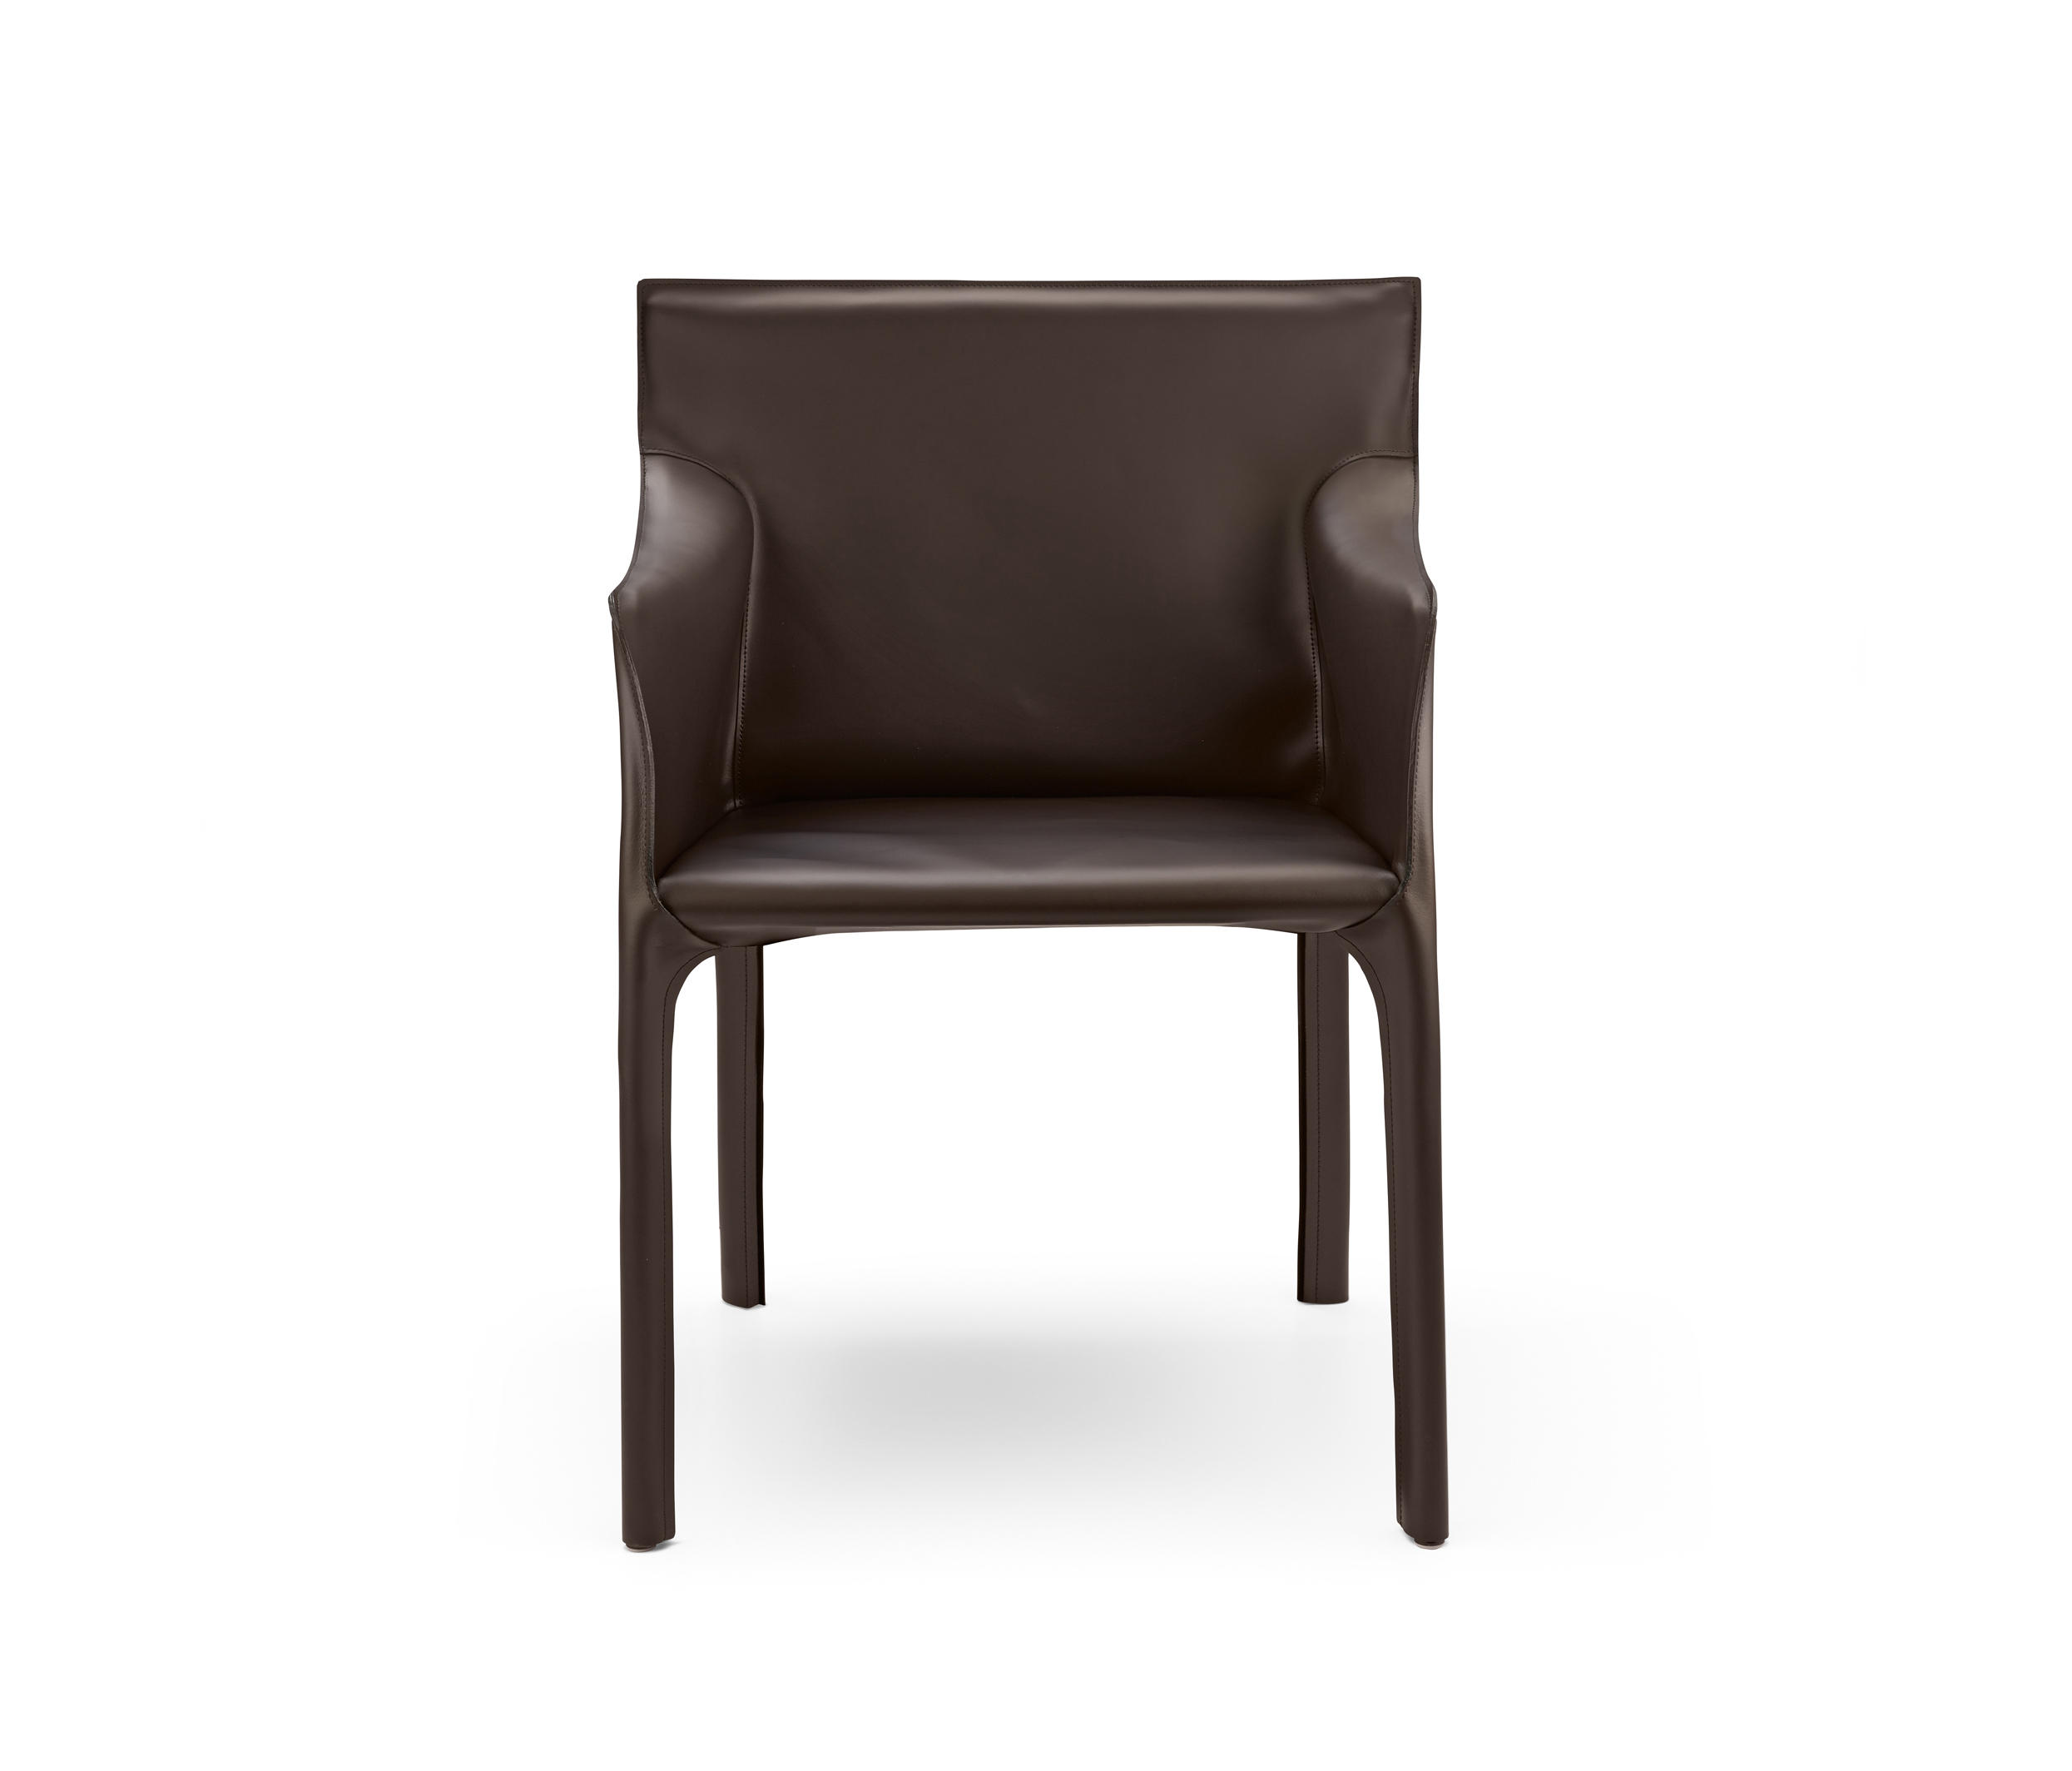 SADDLE CHAIR - Restaurant chairs from Walter Knoll | Architonic